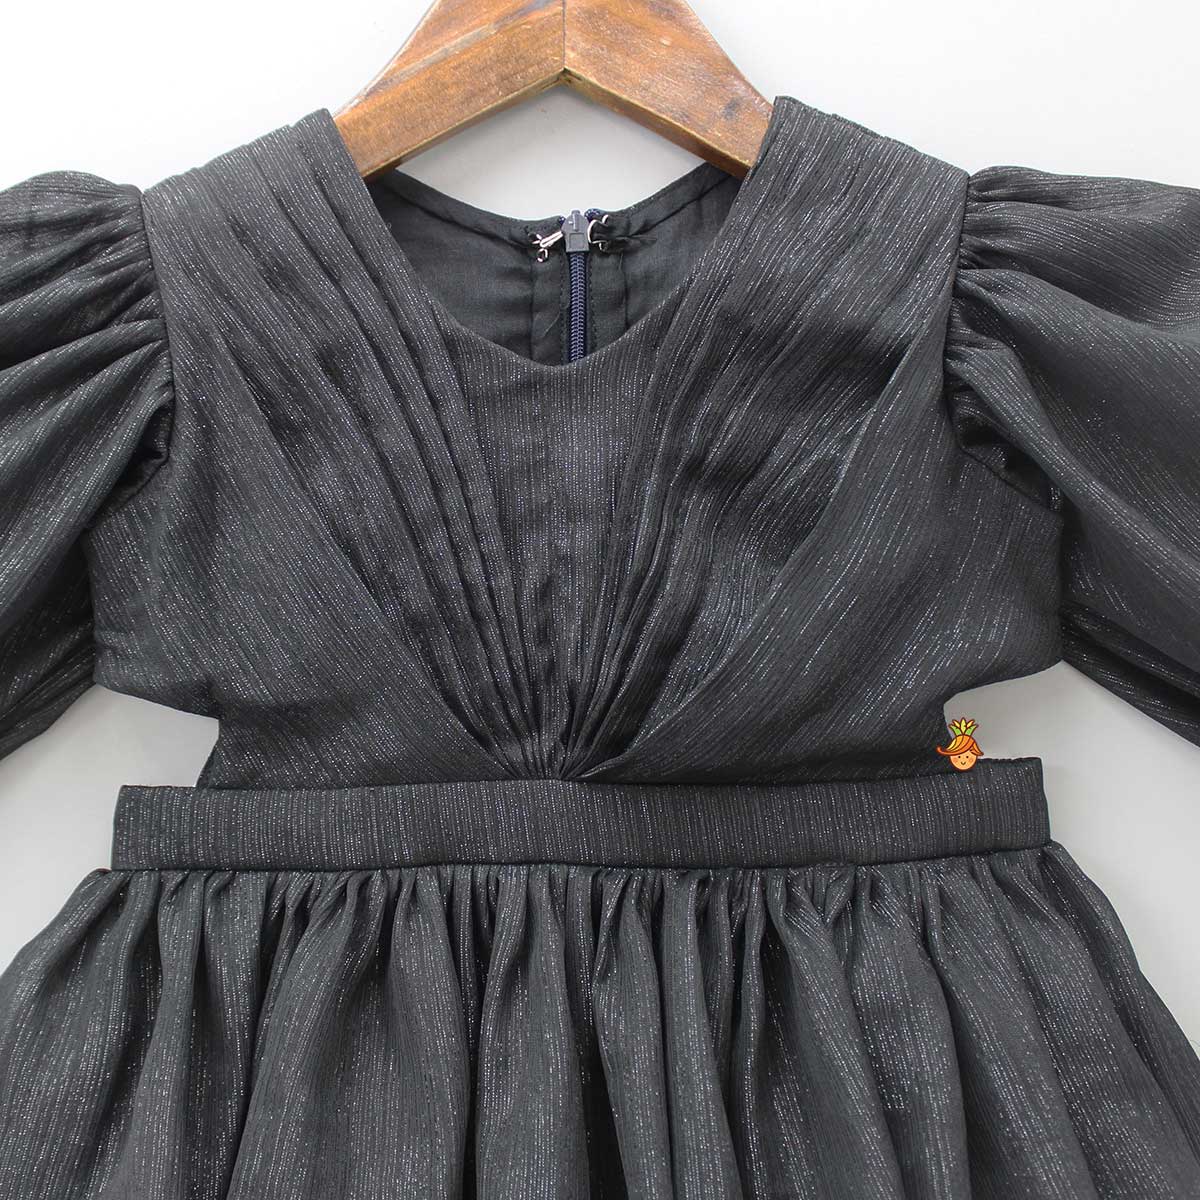 Black Shimmery And Layered Frilly Party Dress